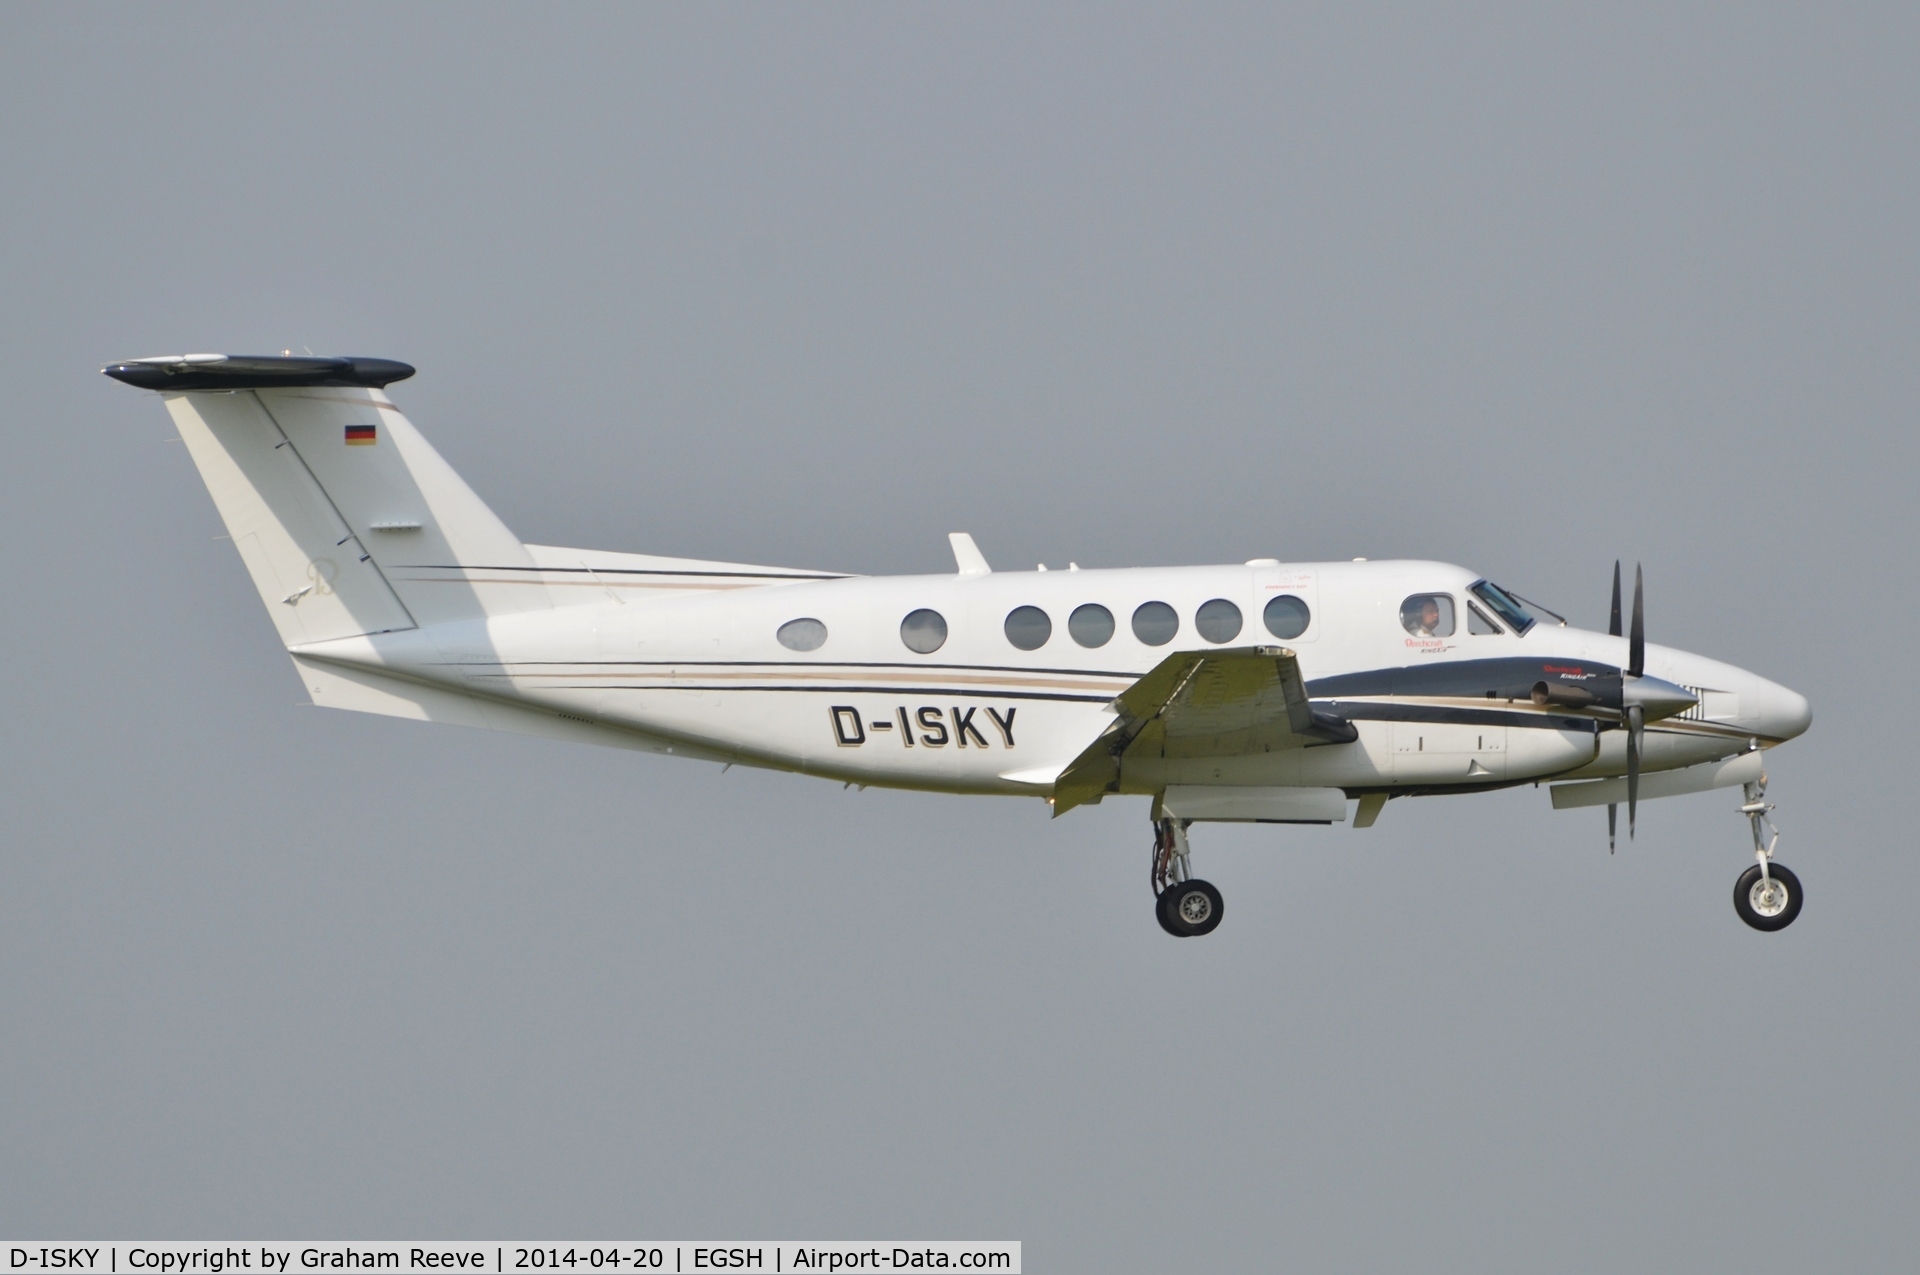 D-ISKY, 2009 Hawker Beechcraft B200 King Air C/N BB-2014, About to land on runway 09.